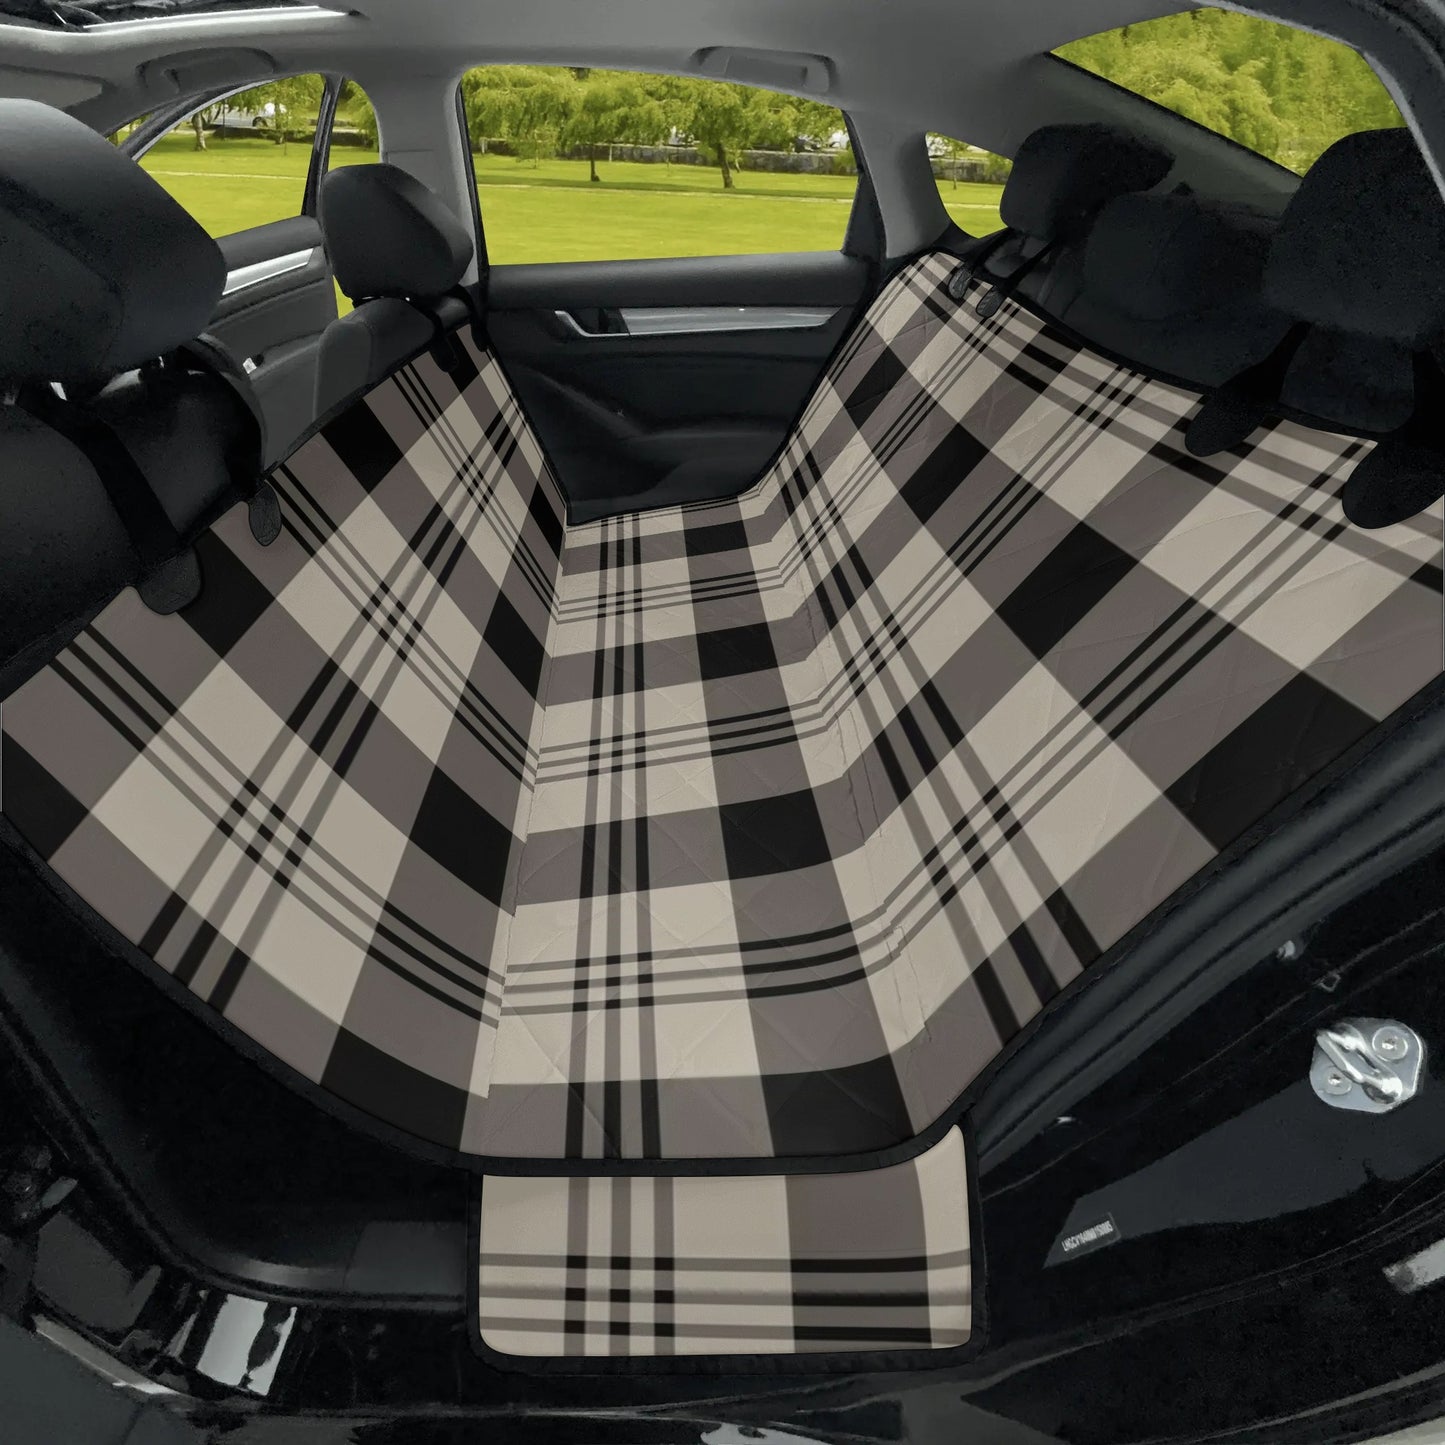 Plaid Dog Back Seat Cover, Black Grey Tartan Check Cat Protector Pets Waterproof Washable Vehicle Blanket SUV Auto Truck Accessory